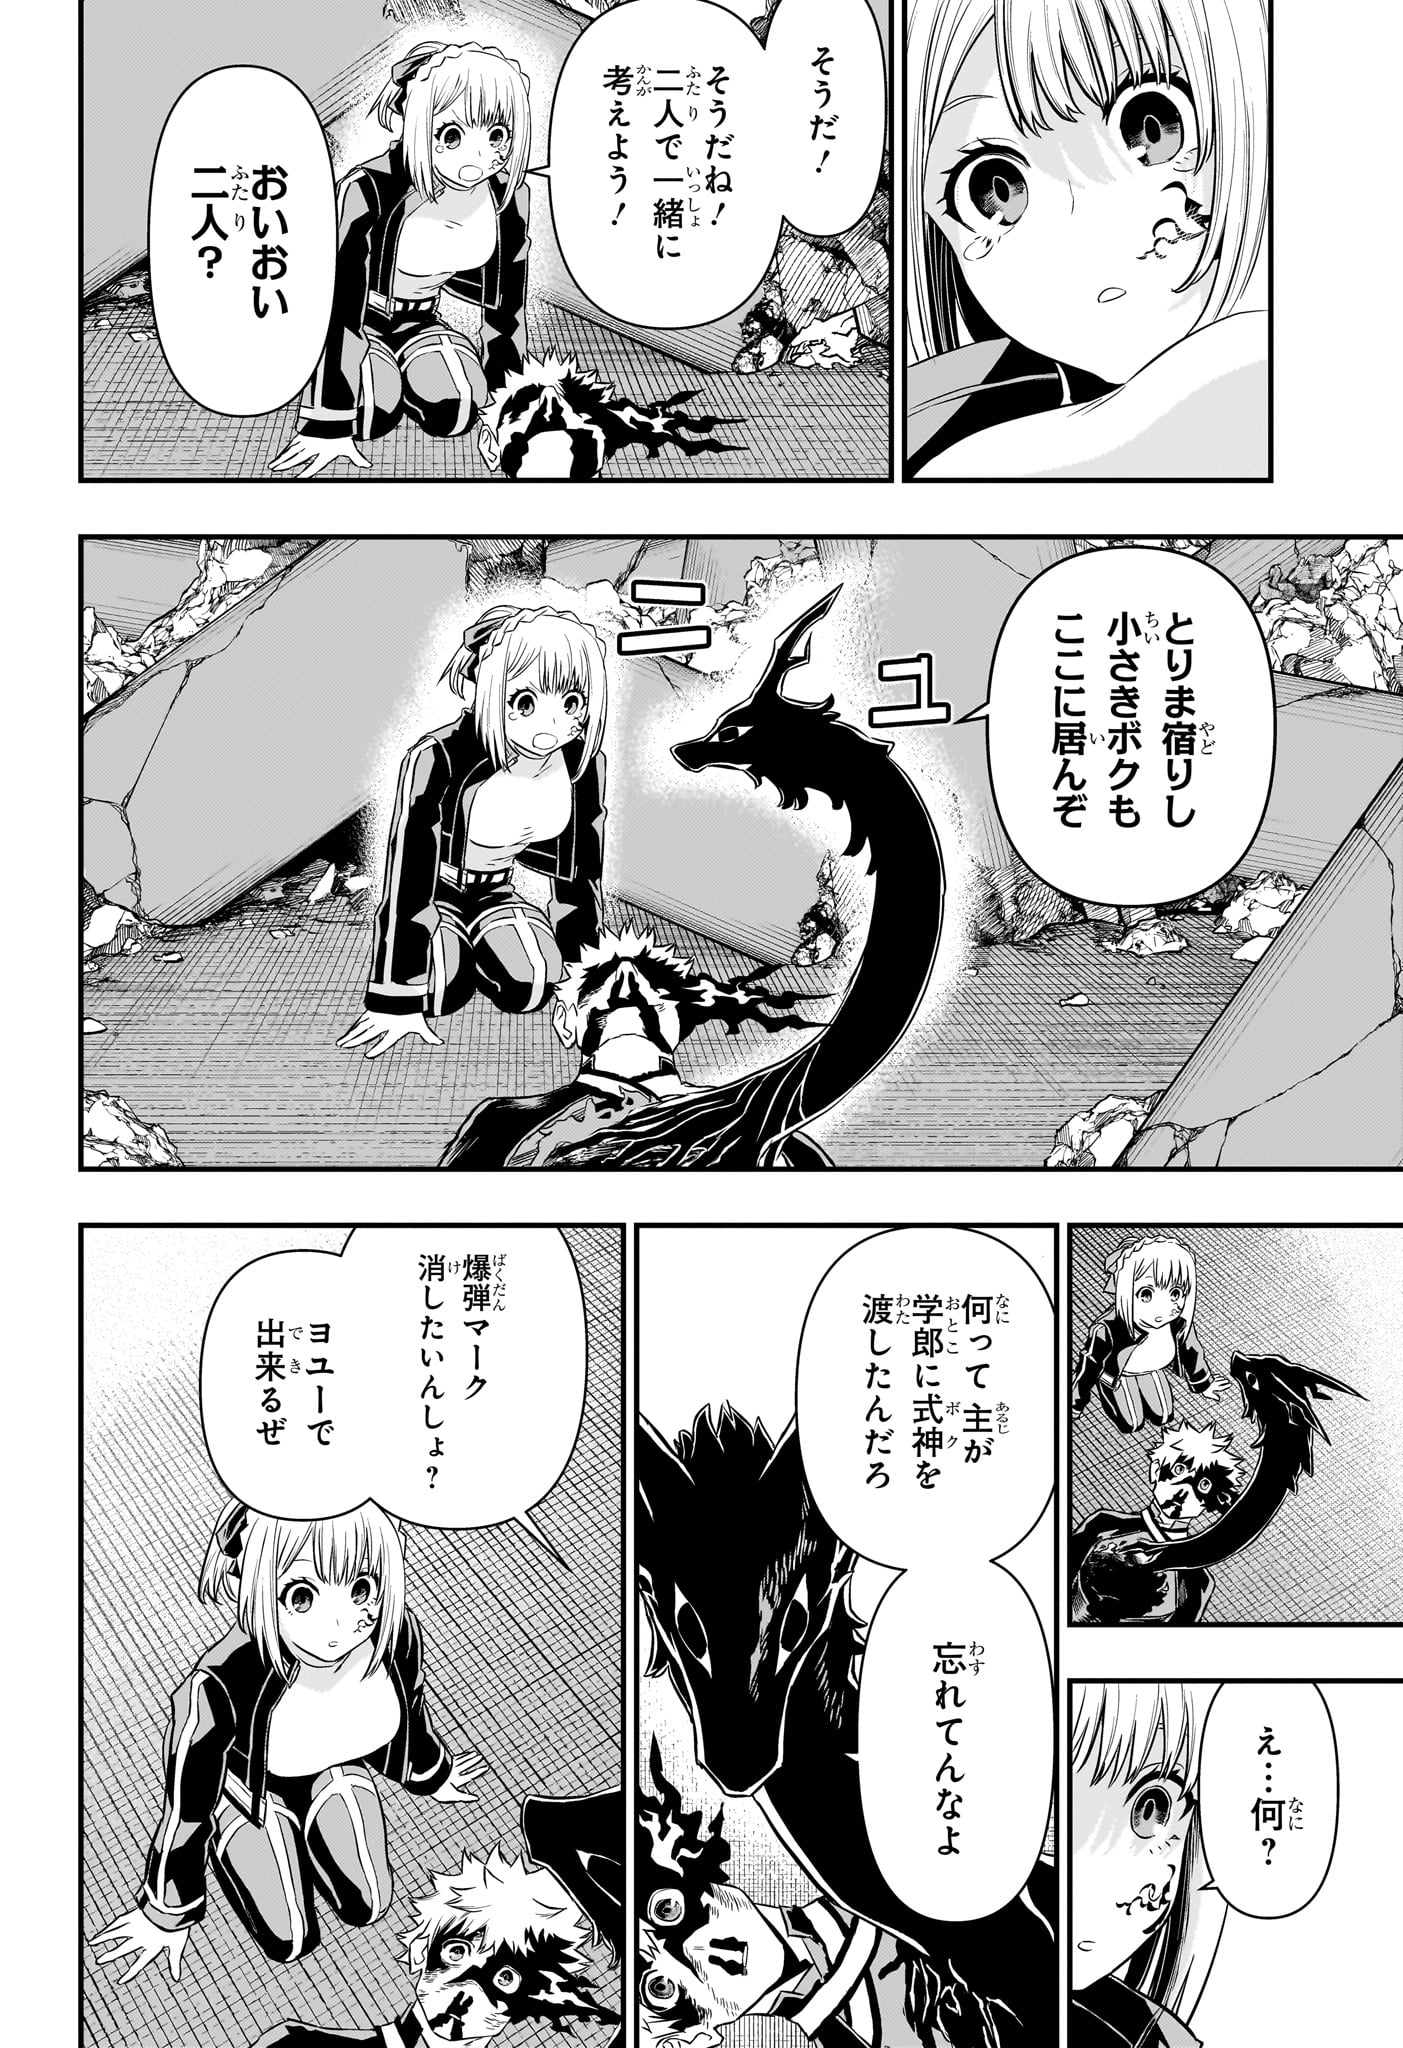 Nue no Onmyouji - Chapter 57 - Page 12